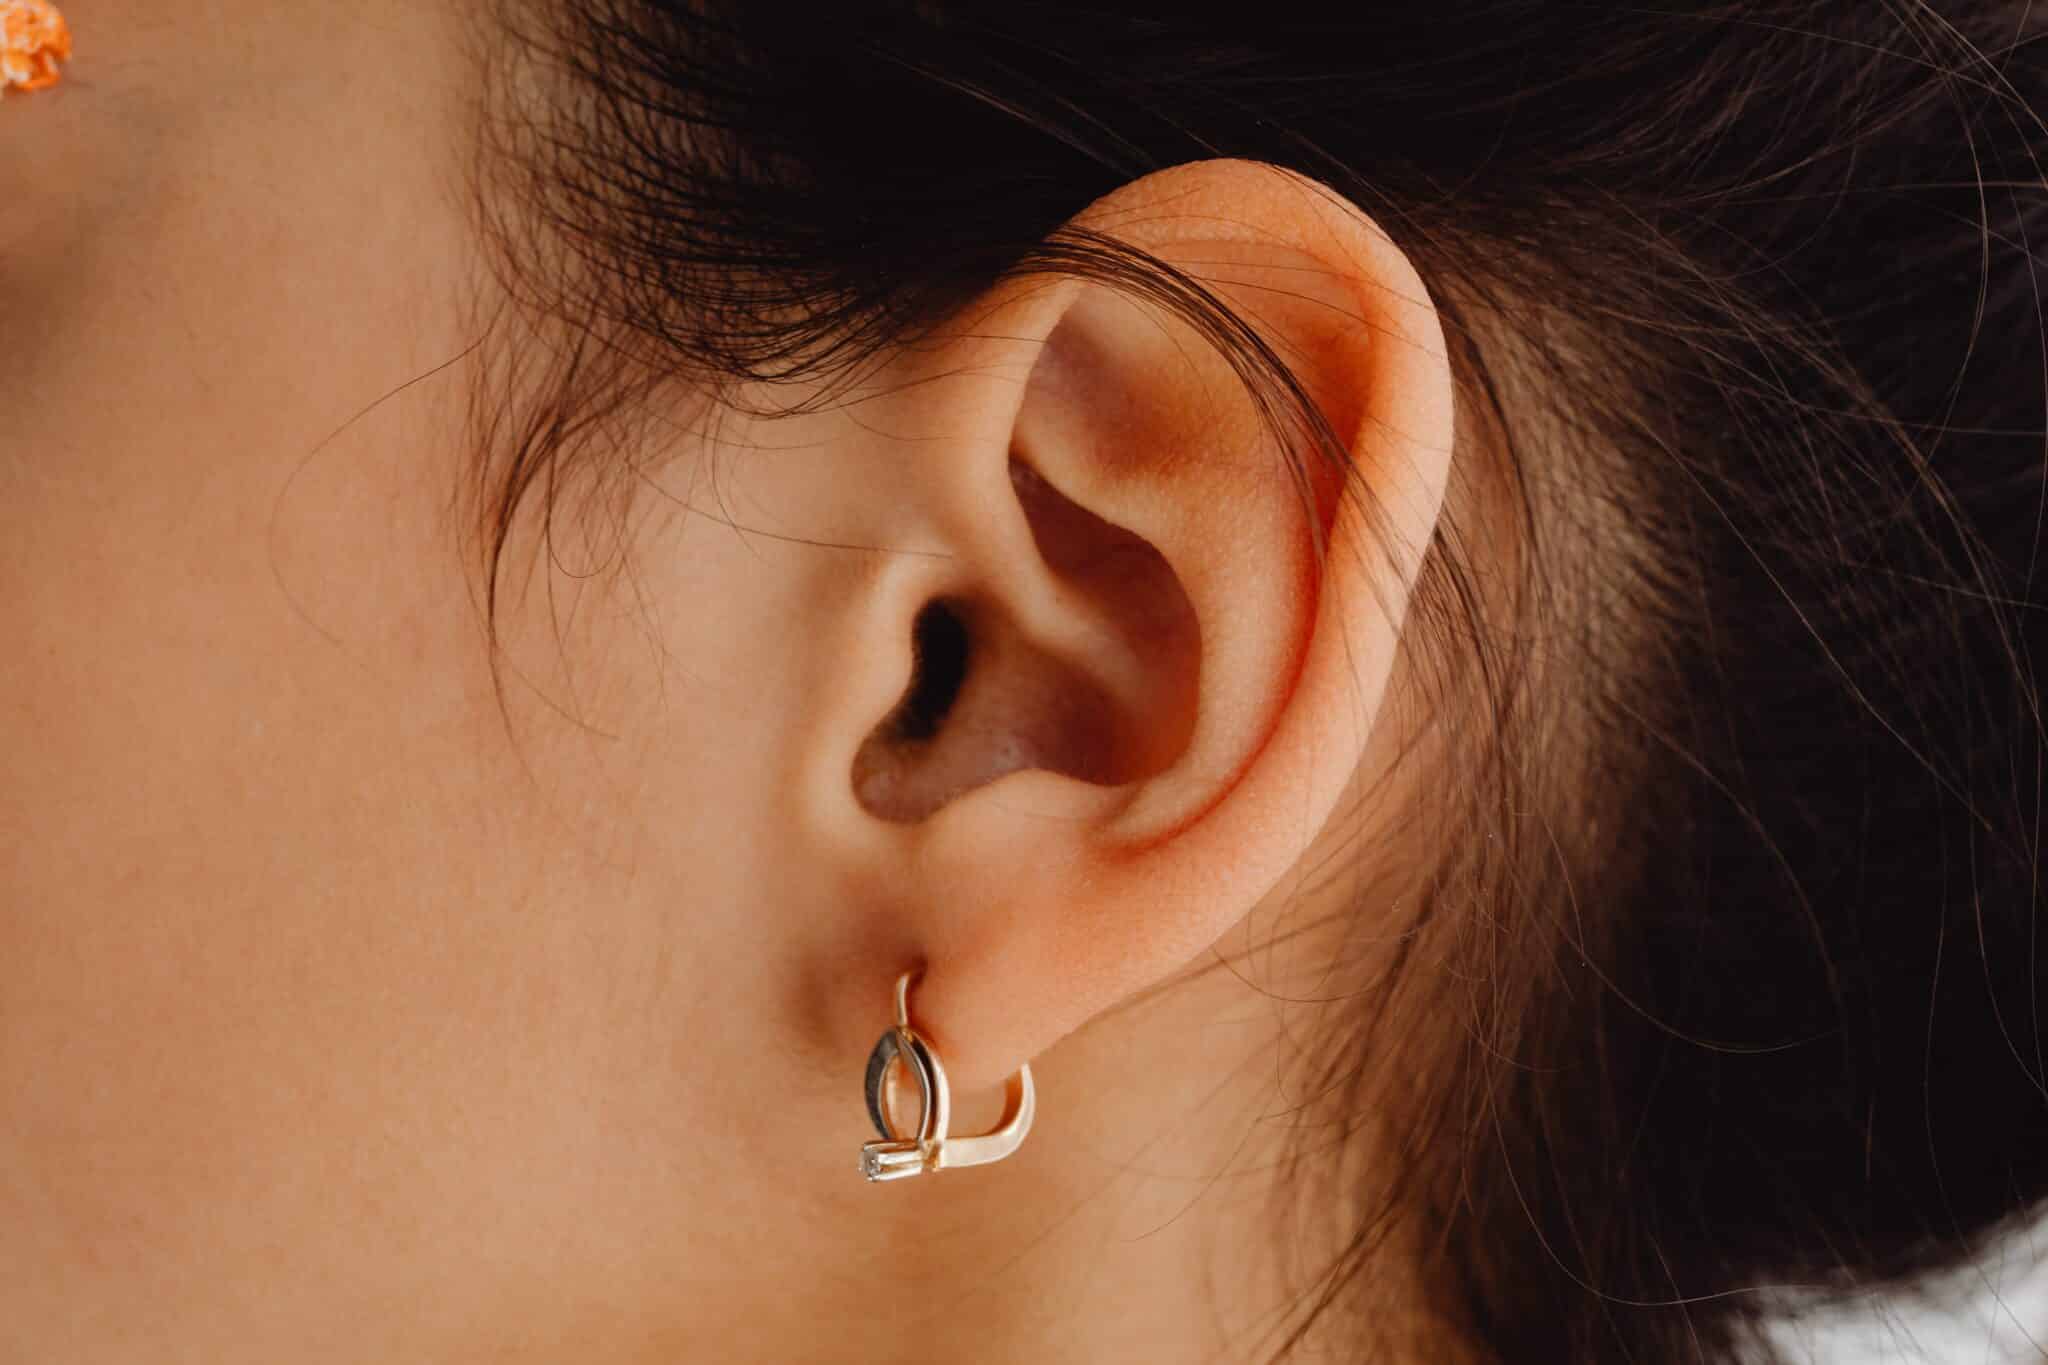 Helix Piercings: Your Ultimate Guide